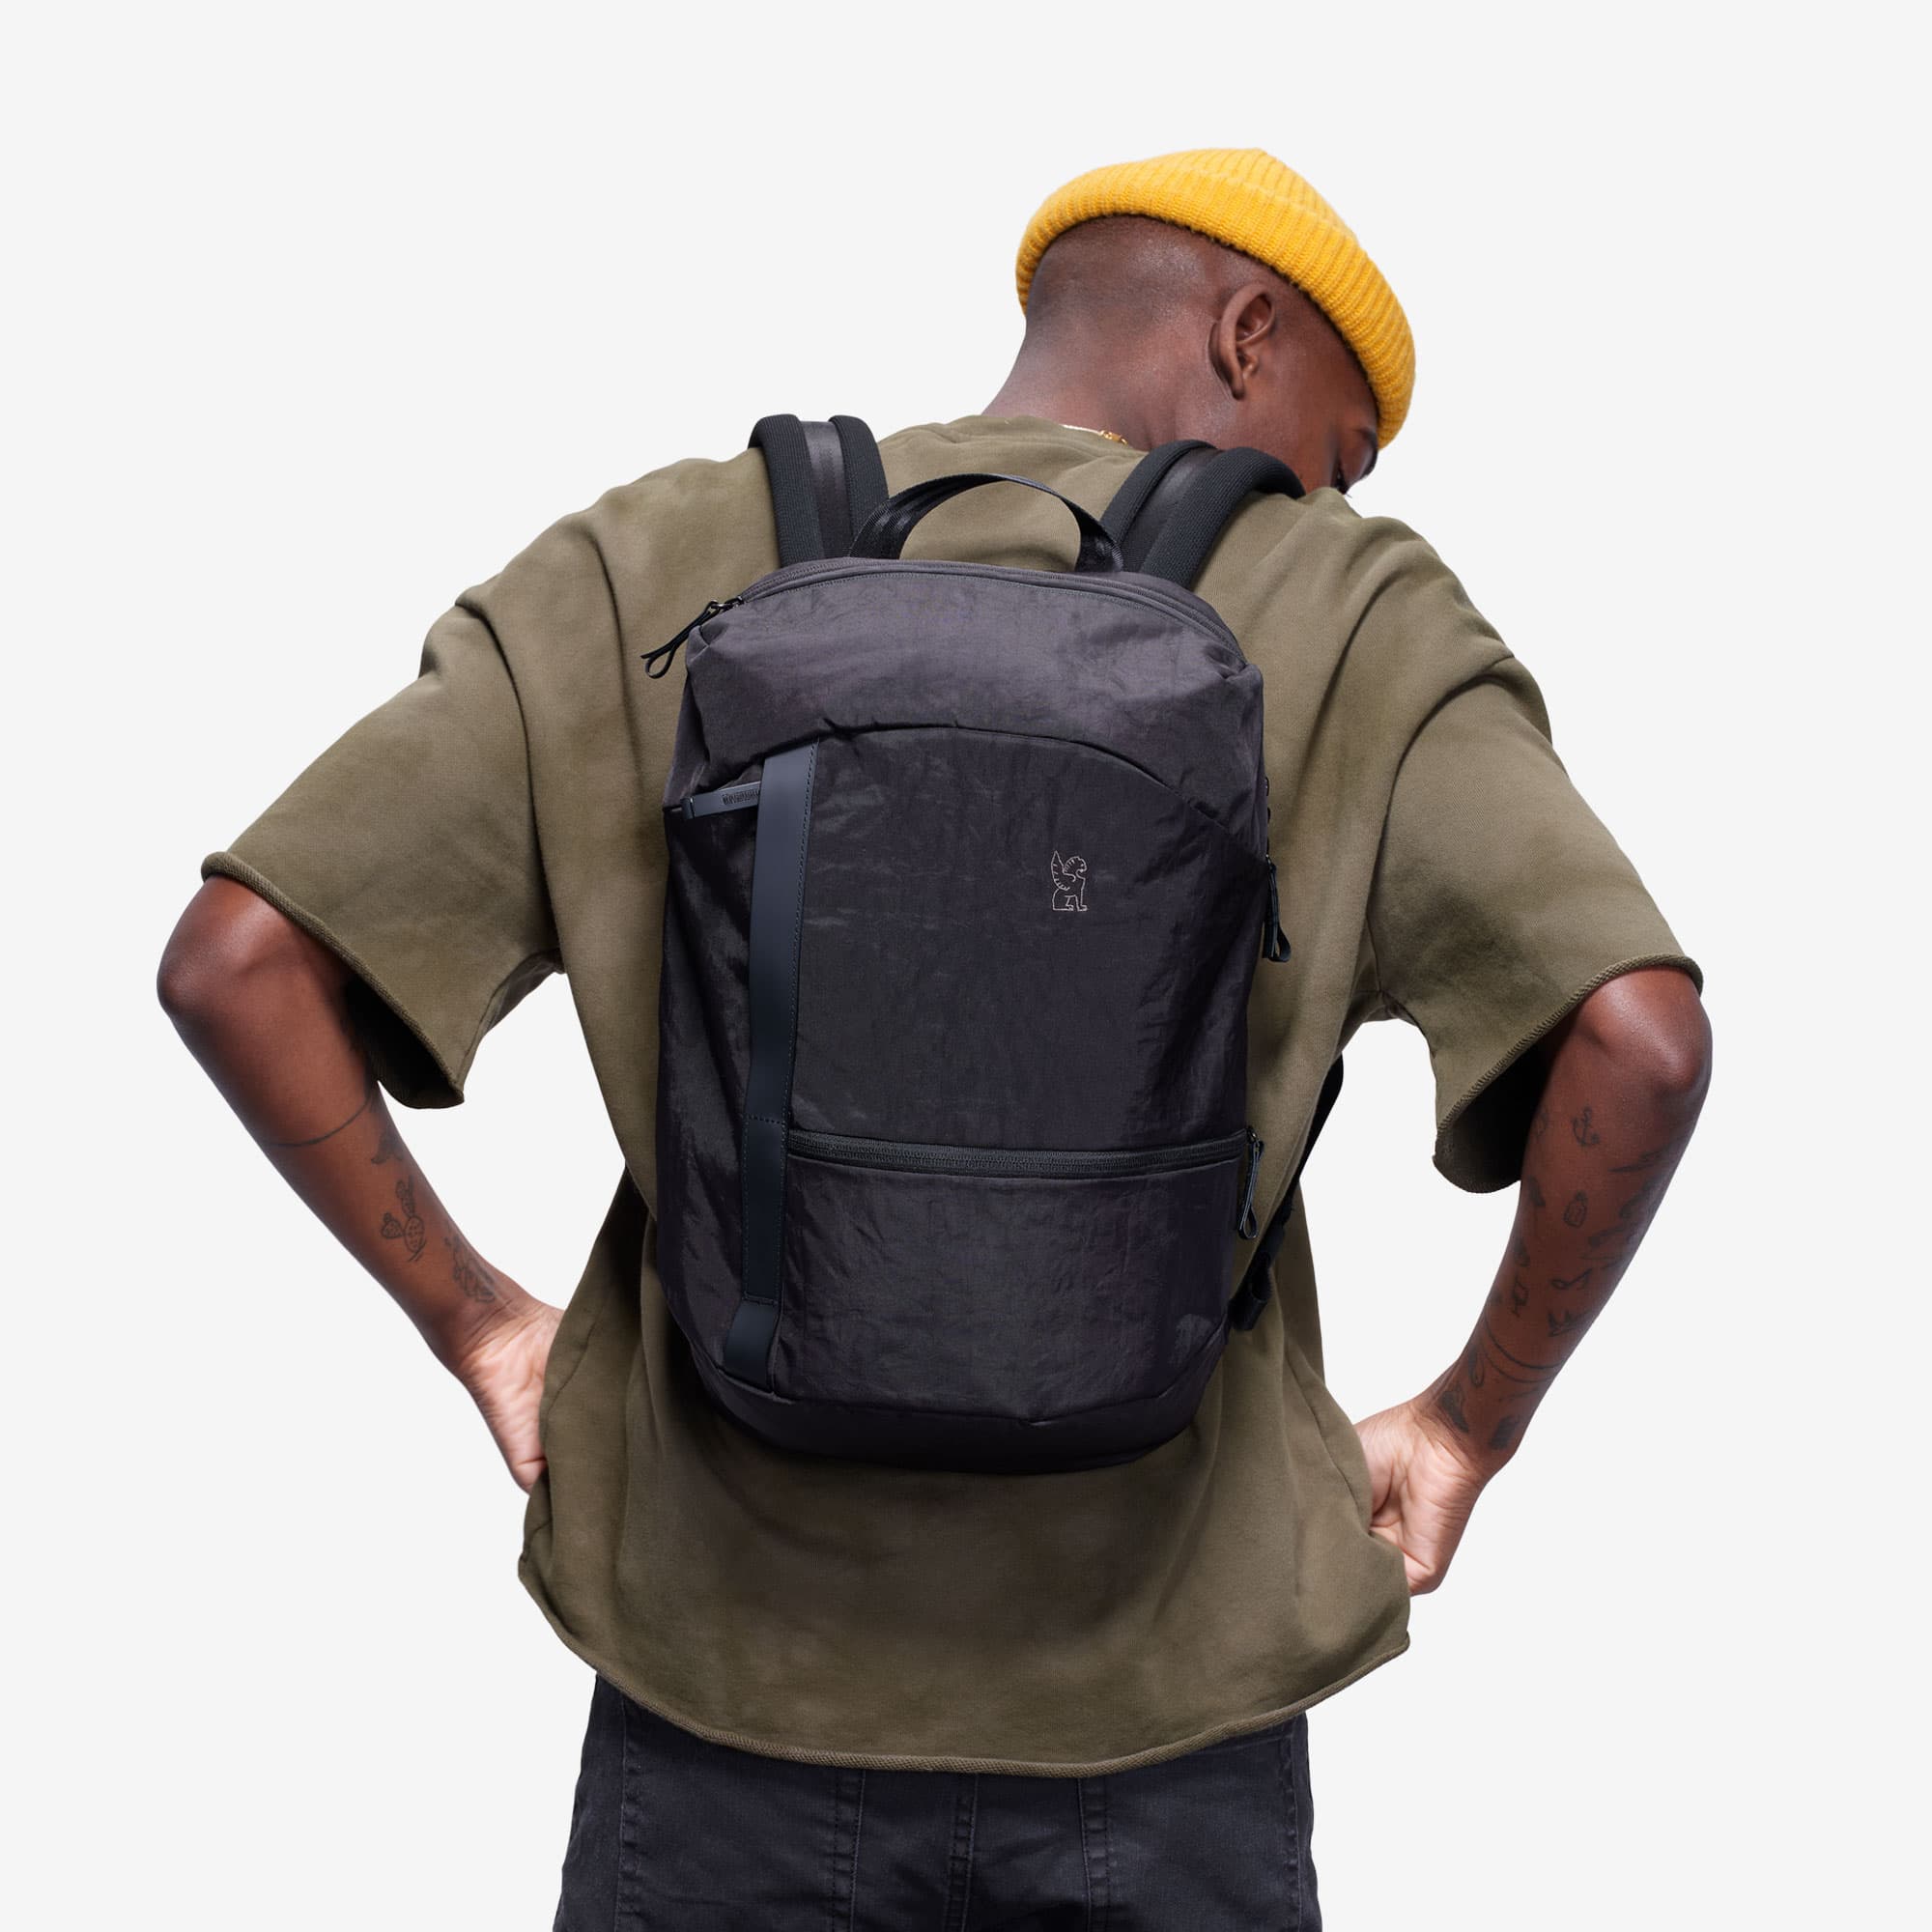 Camden backpack in black on a person